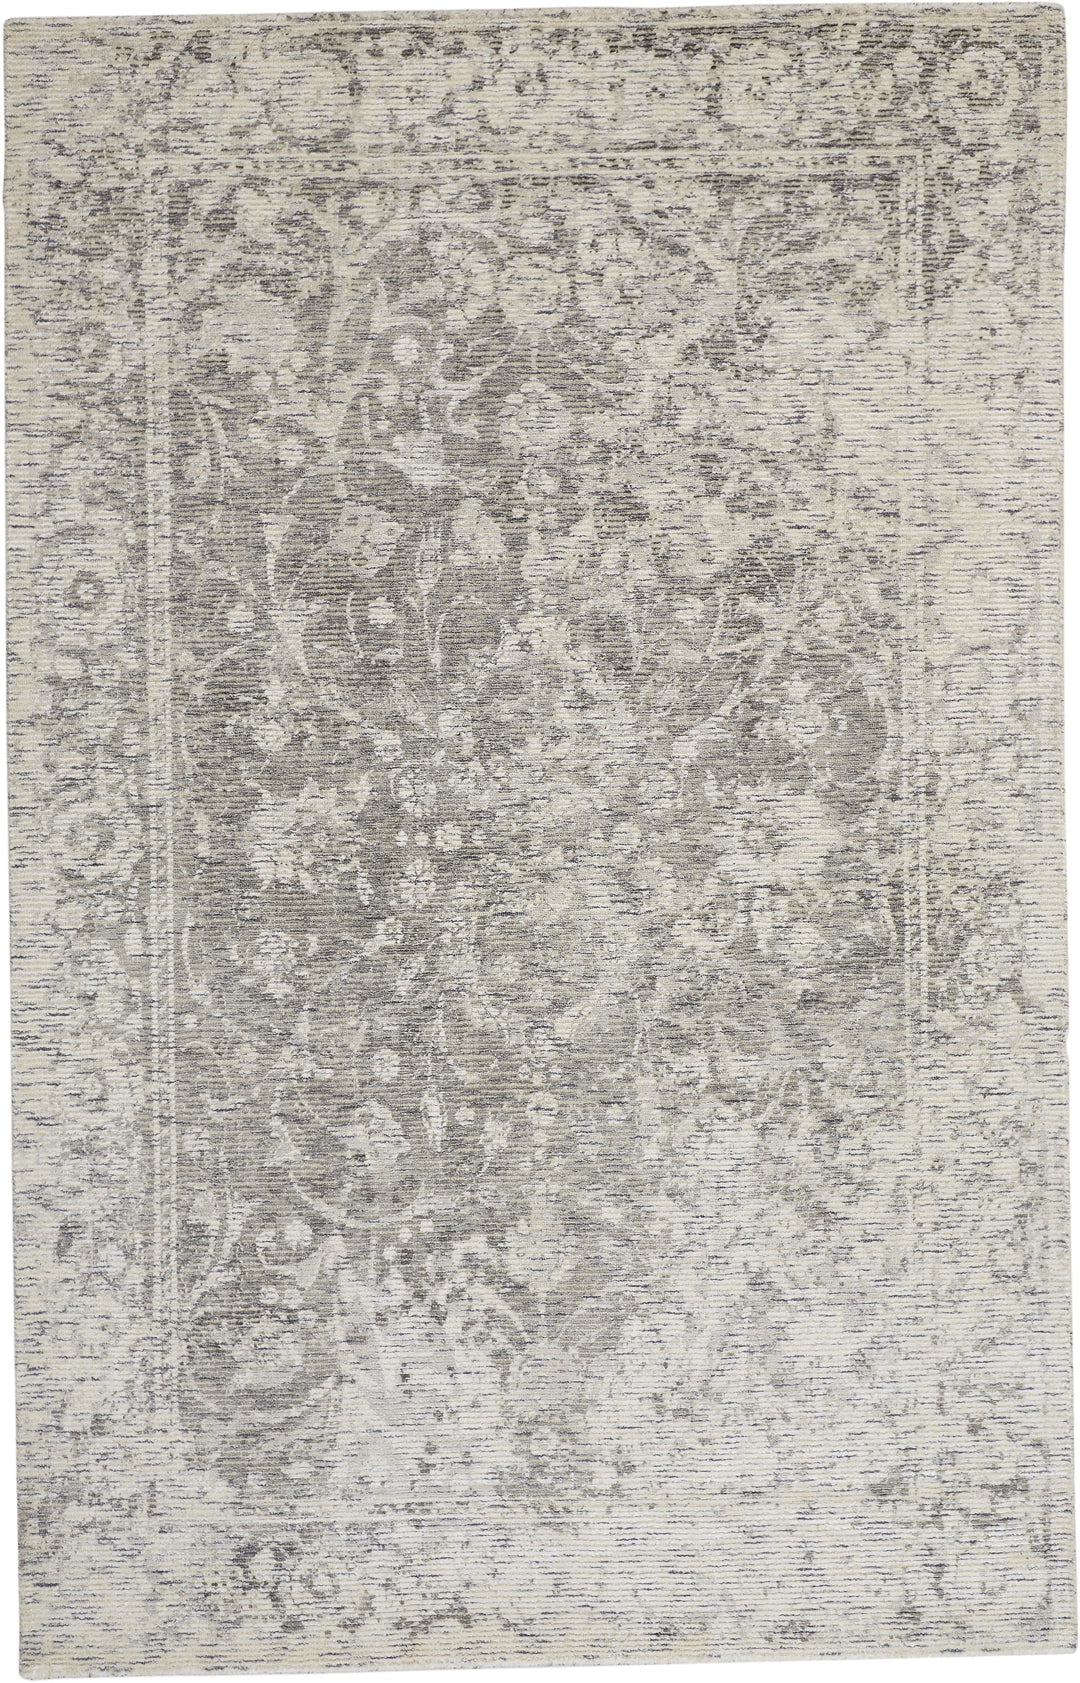 Feizy Feizy Reagan Distressed Ornamental Wool Rug - Ivory & Gray - Available in 5 Sizes 5' x 8' 7408685FGRY000E10